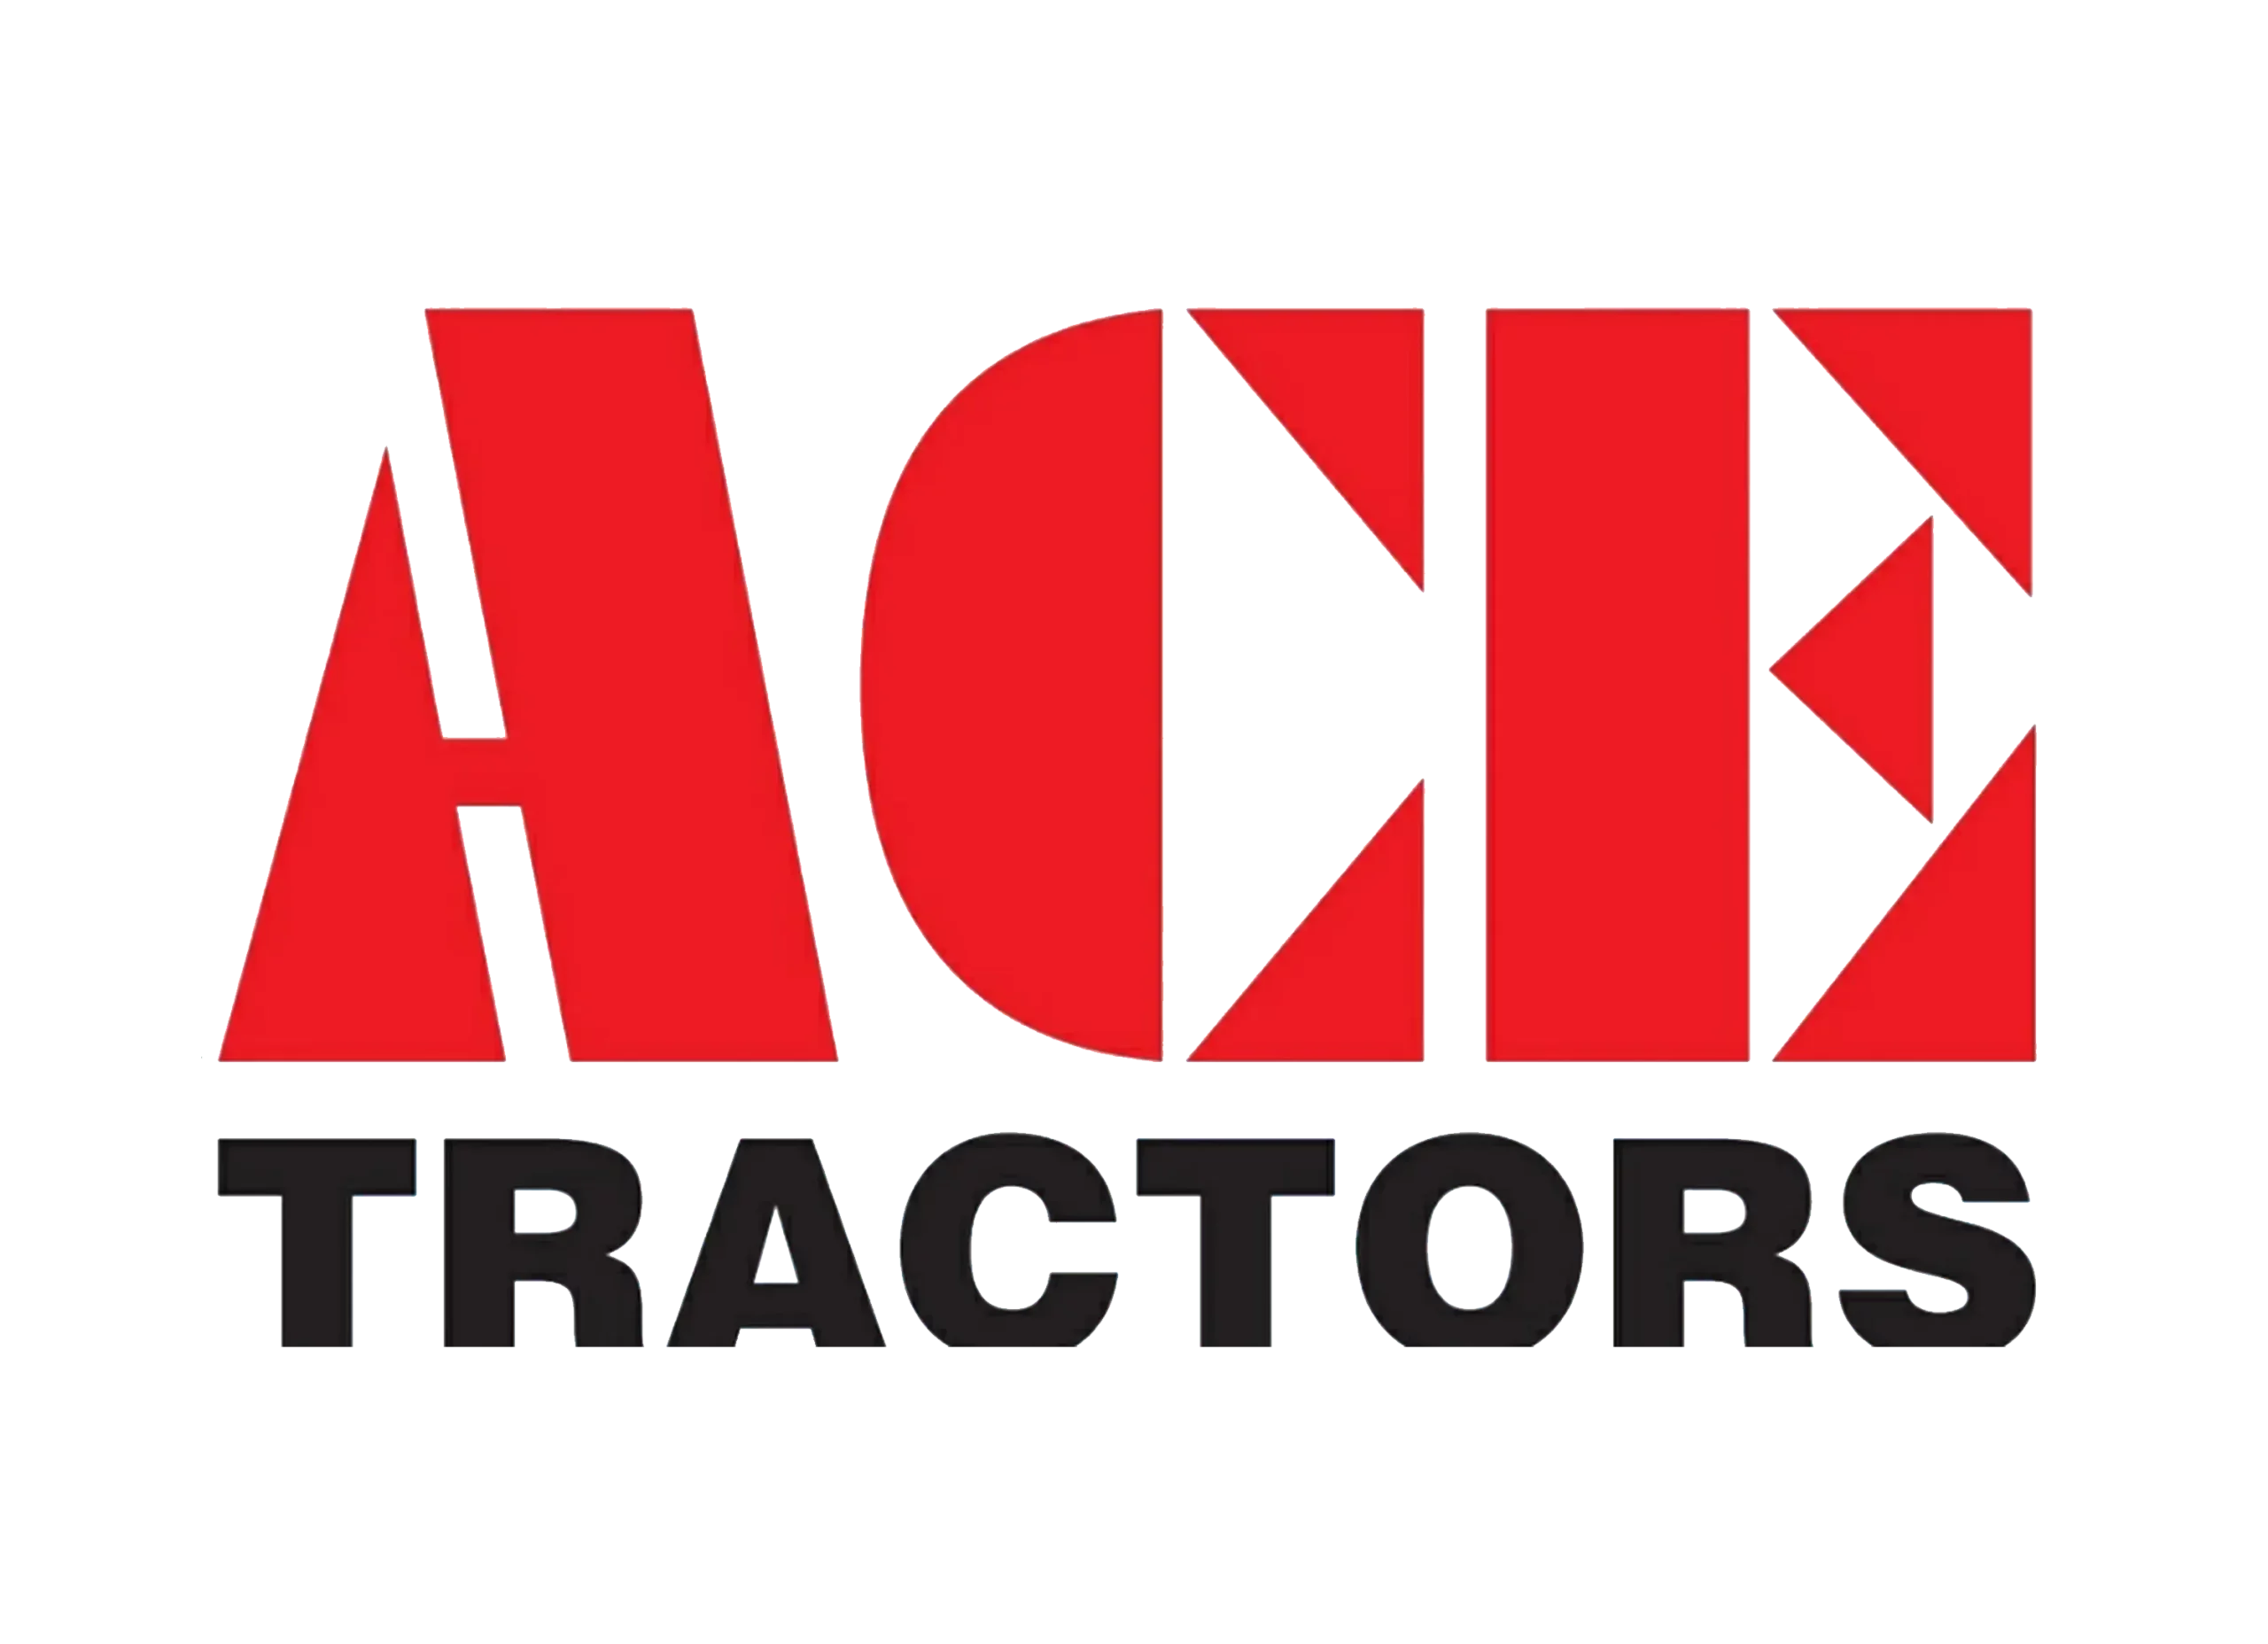 ACE tractor logo 1995-present